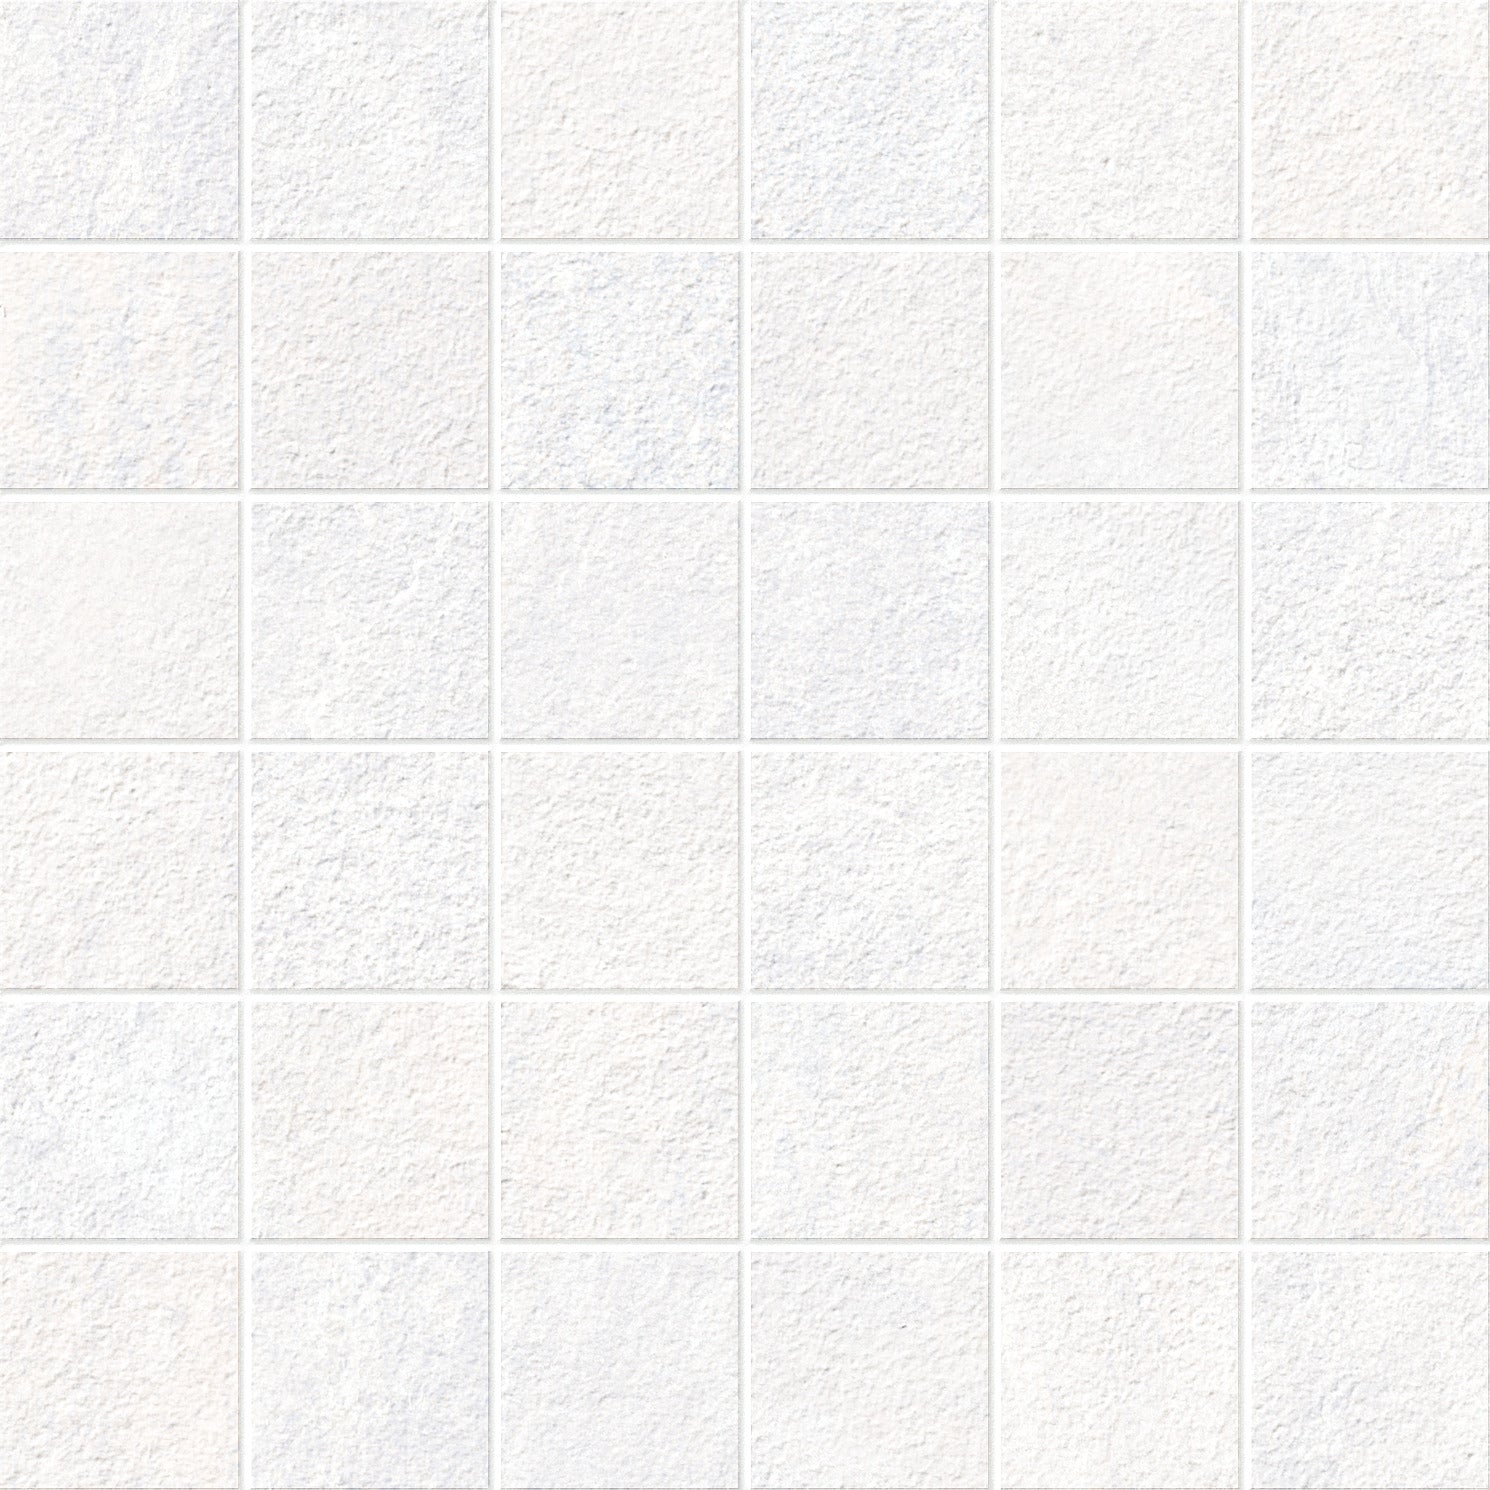 landmark 9mm explore arctic white straight stack 2x2 mosaic 12x12x9mm matte rectified porcelain tile distributed by surface group international